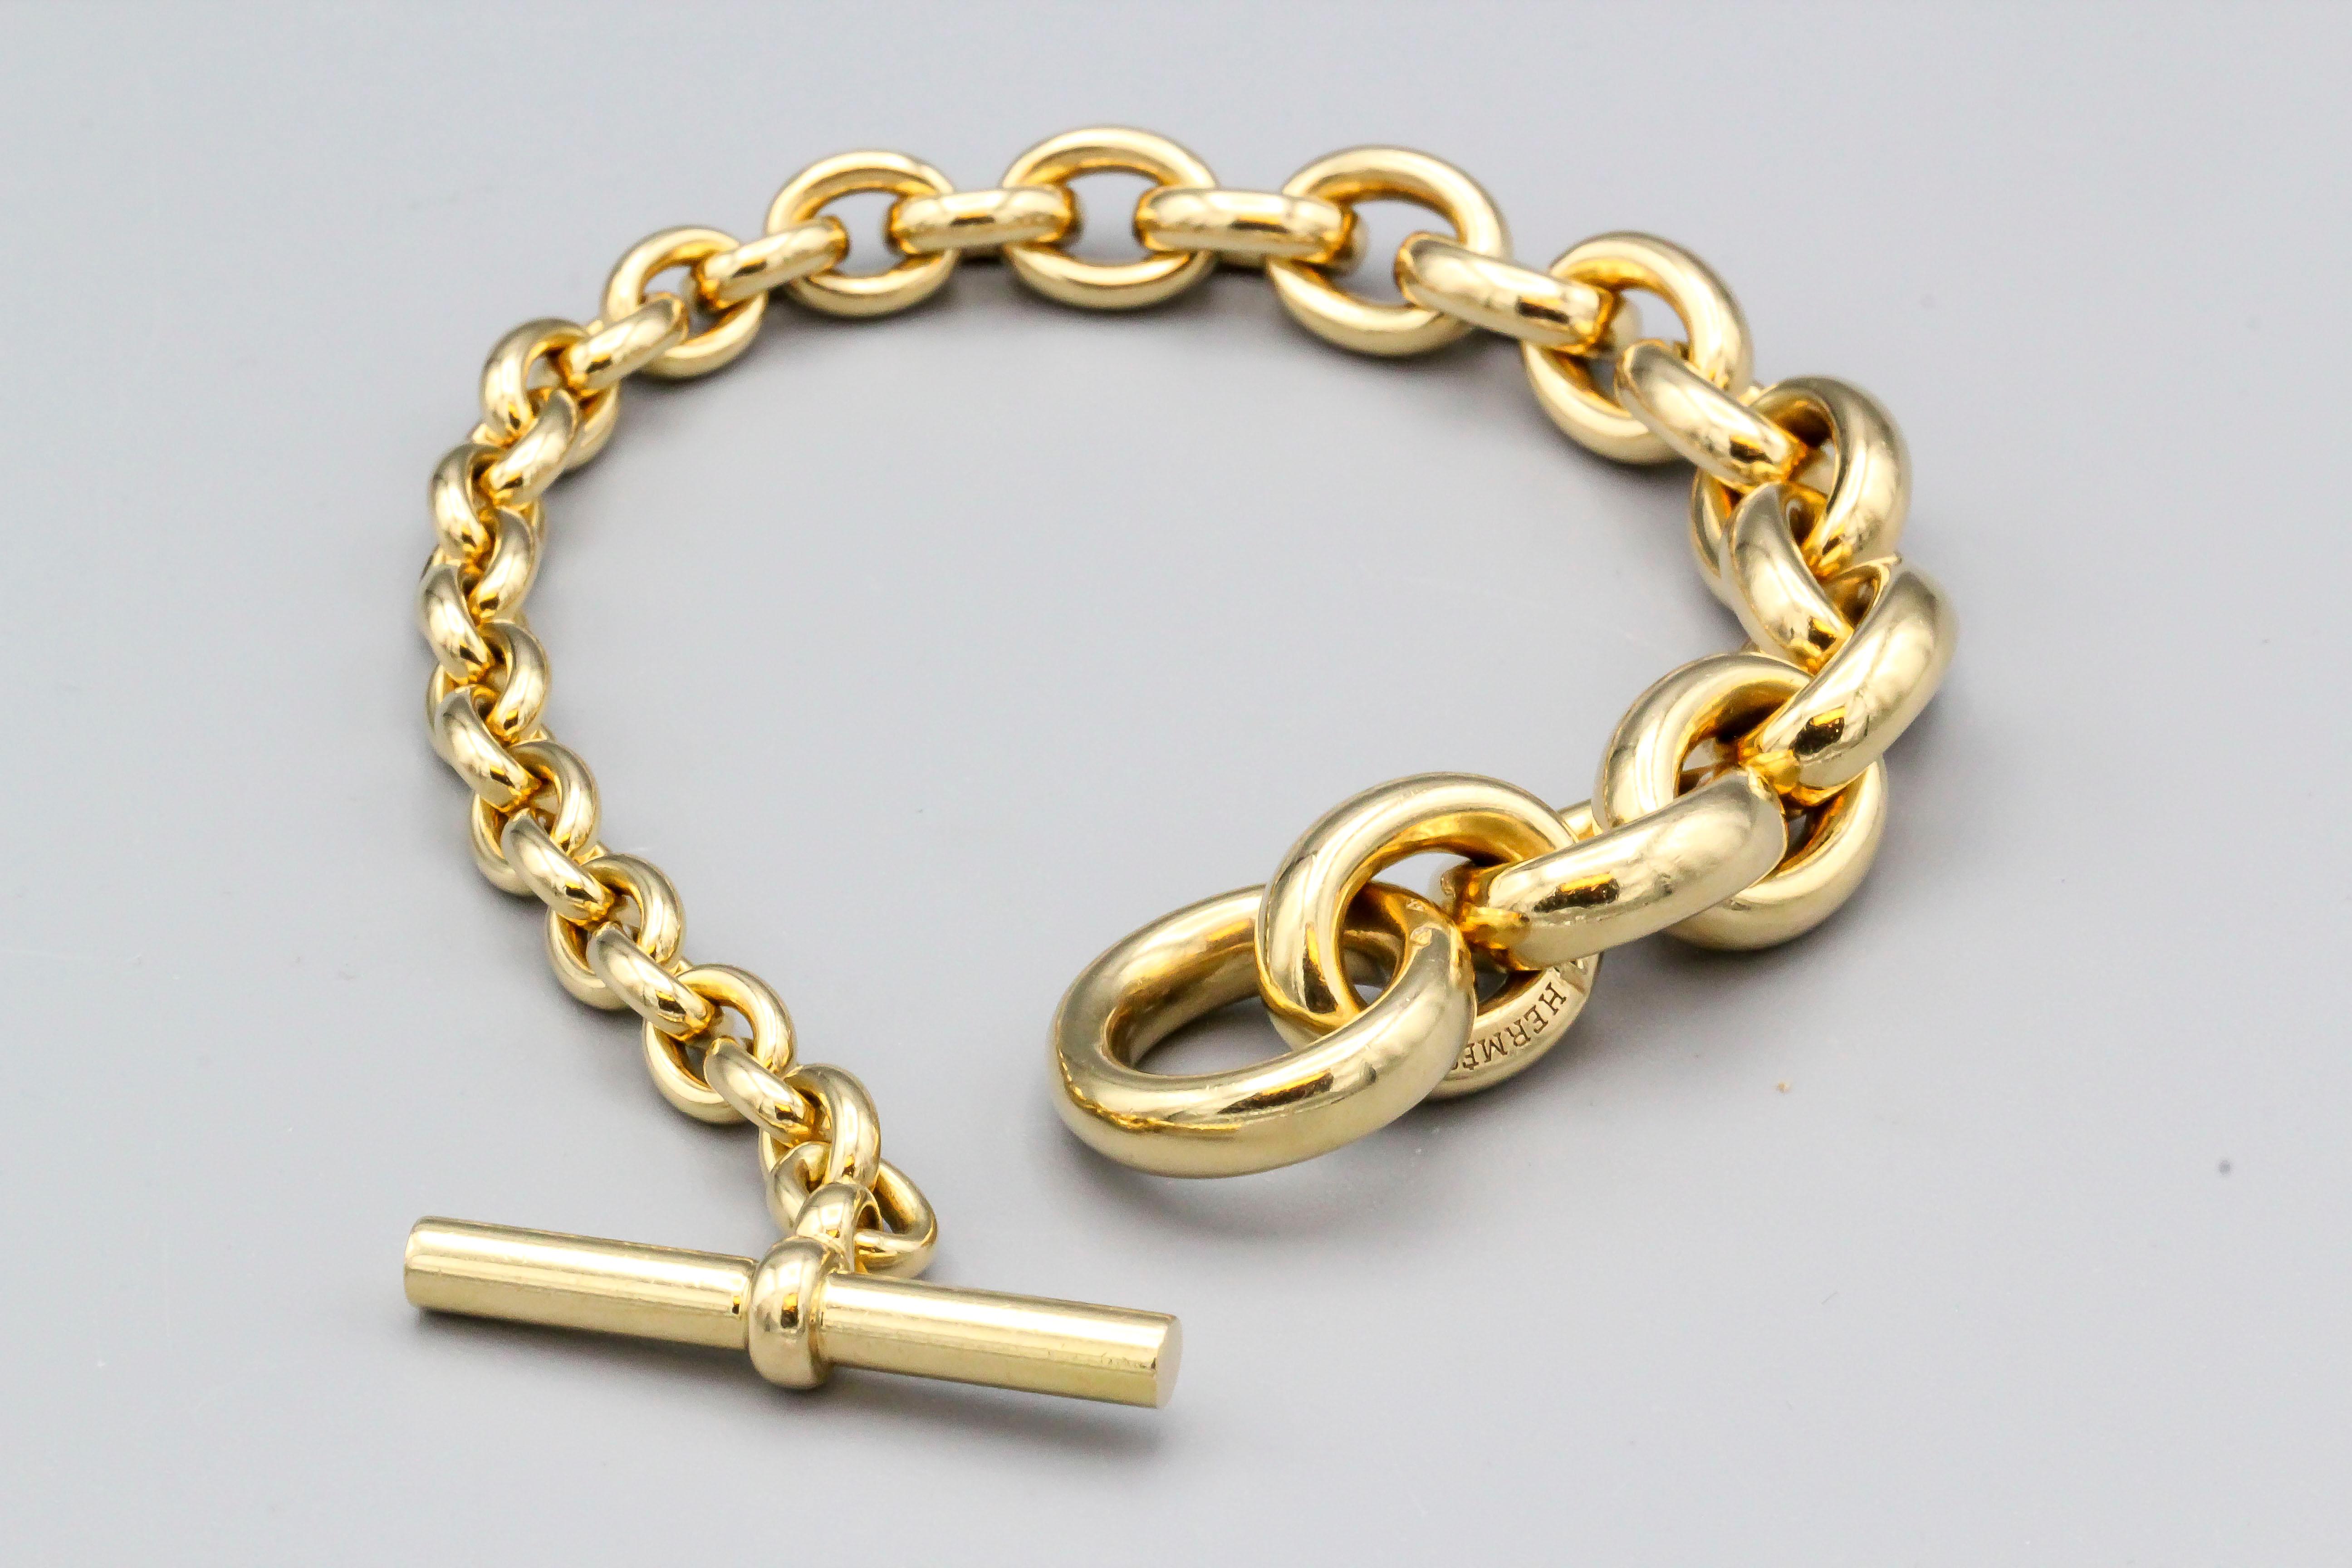 Very fine and scarce 18K yellow gold toggle link bracelet from the 